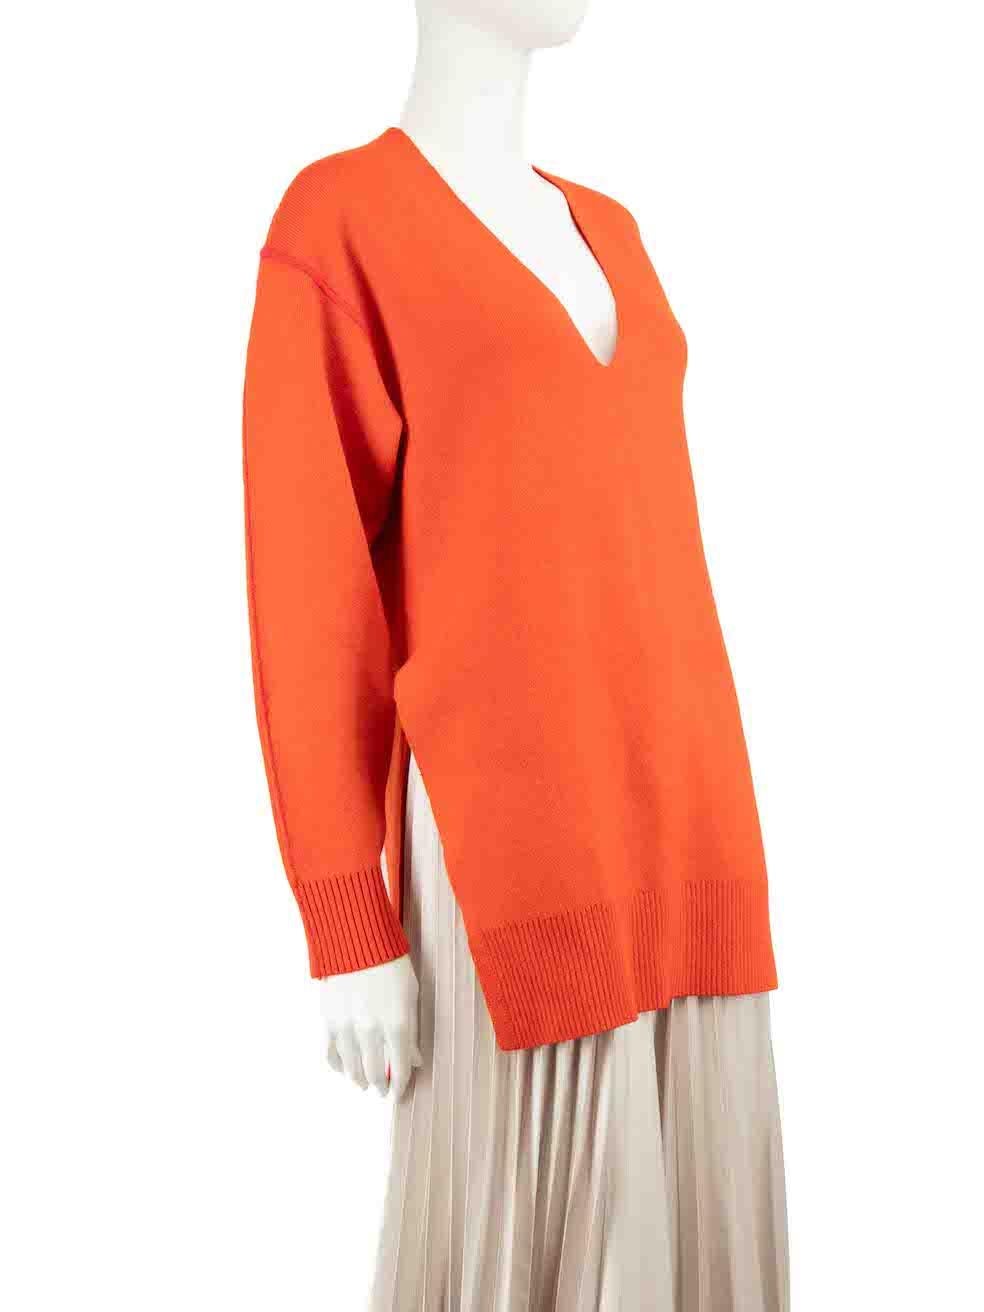 CONDITION is Very good. Minimal wear to jumper is evident. Small marks to the cuff edges, front hem and right side sleeve on this used Proenza Schouler designer resale item.
 
 Details
 Orange
 Wool
 Knit sweater
 Long sleeves
 V-neck
 Slit side